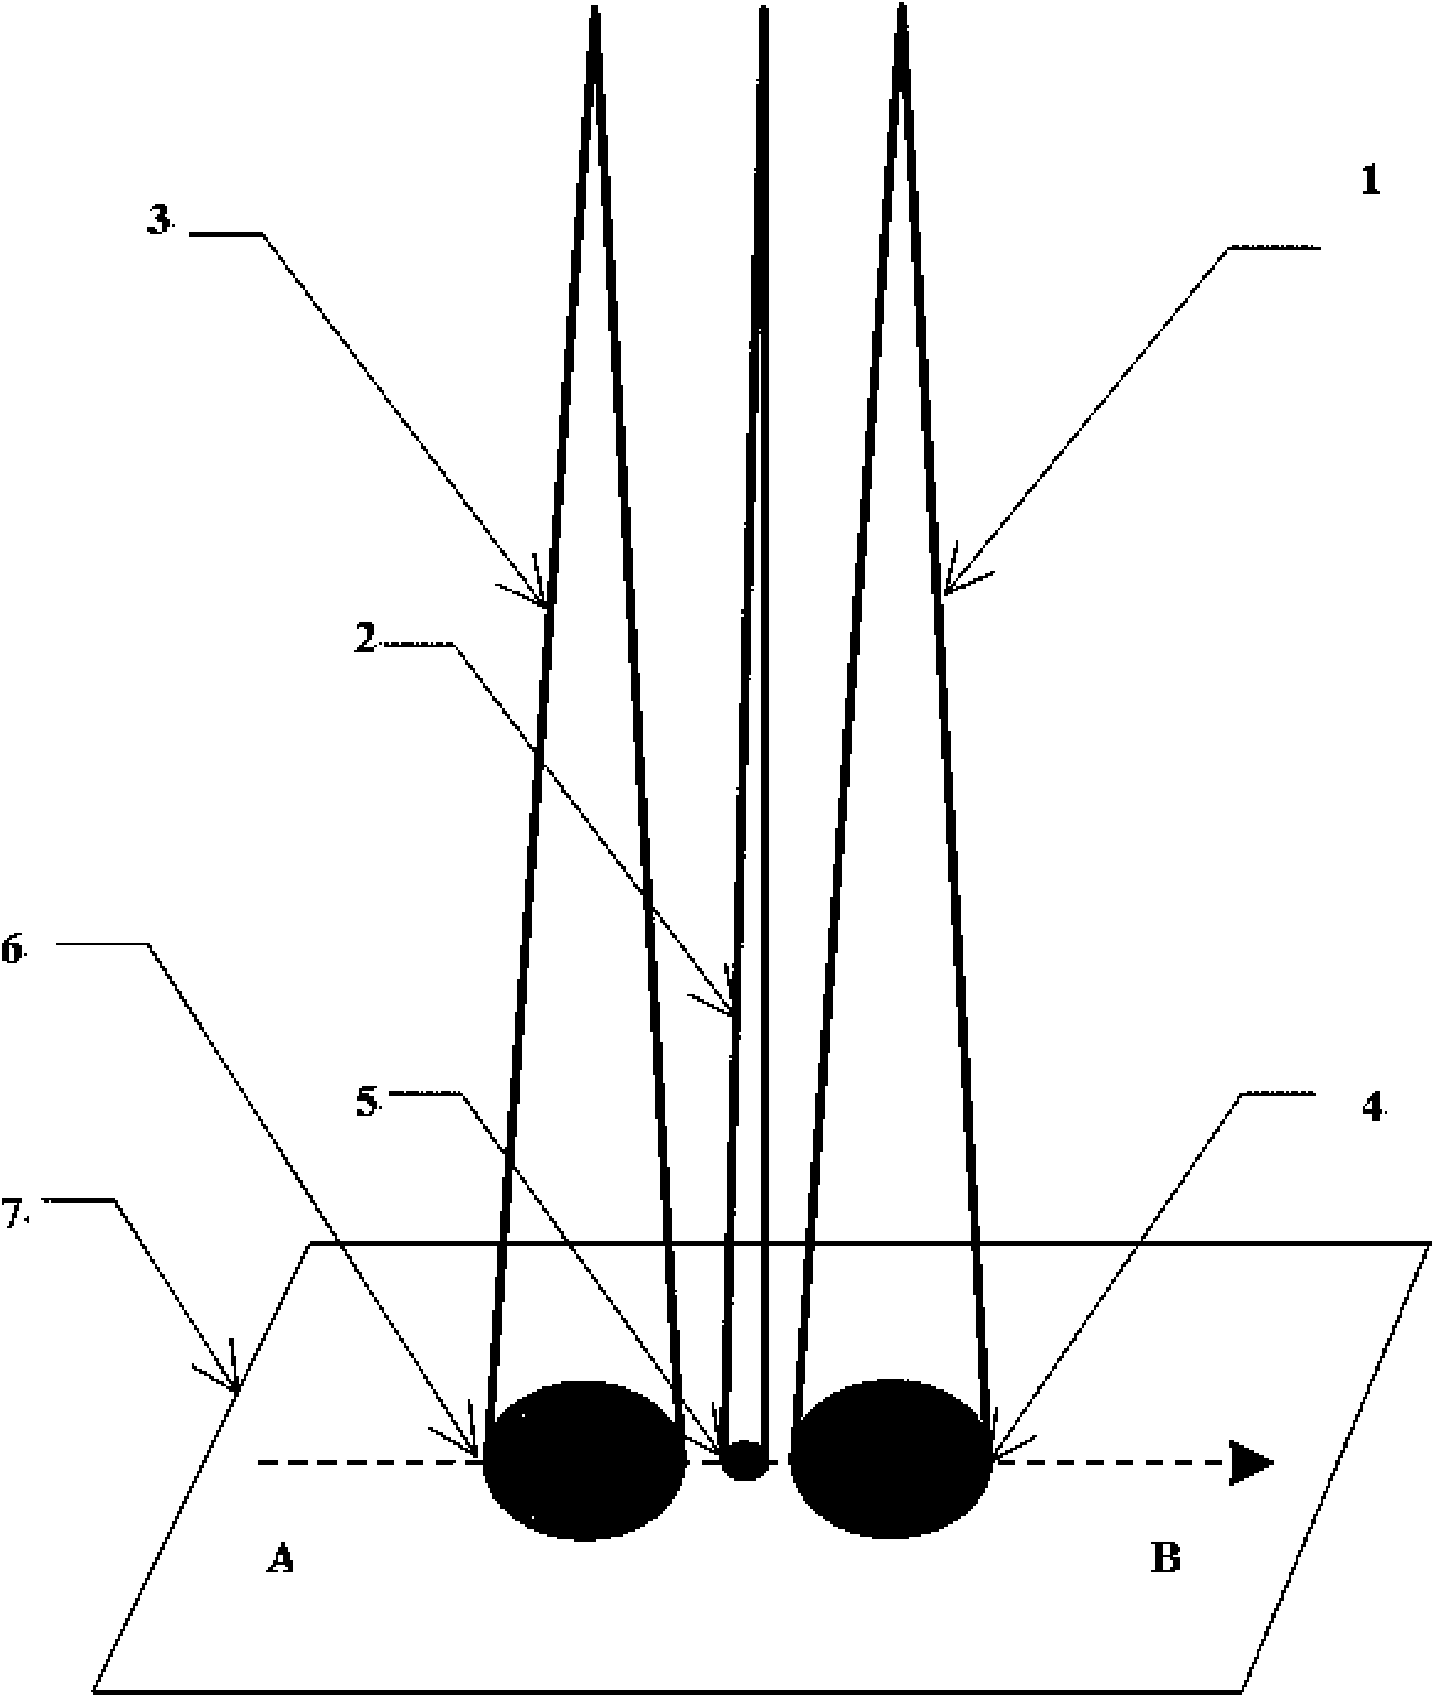 Fast forming method of fusion of metal powder of three beams of laser compound scanning